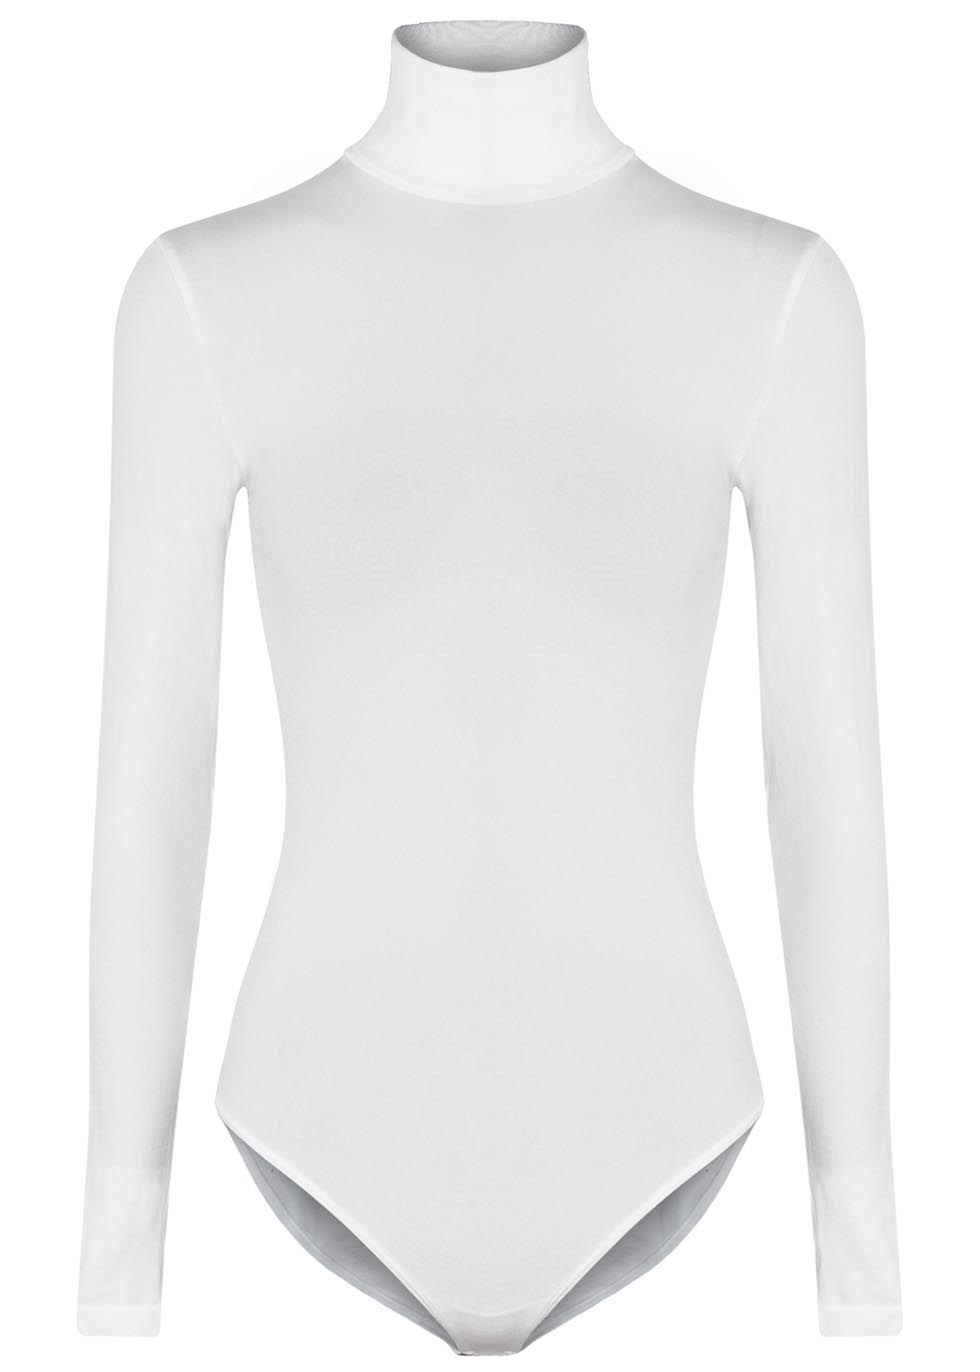 Opening sales Wolford Colorado white stretch-knit bodysuit for All